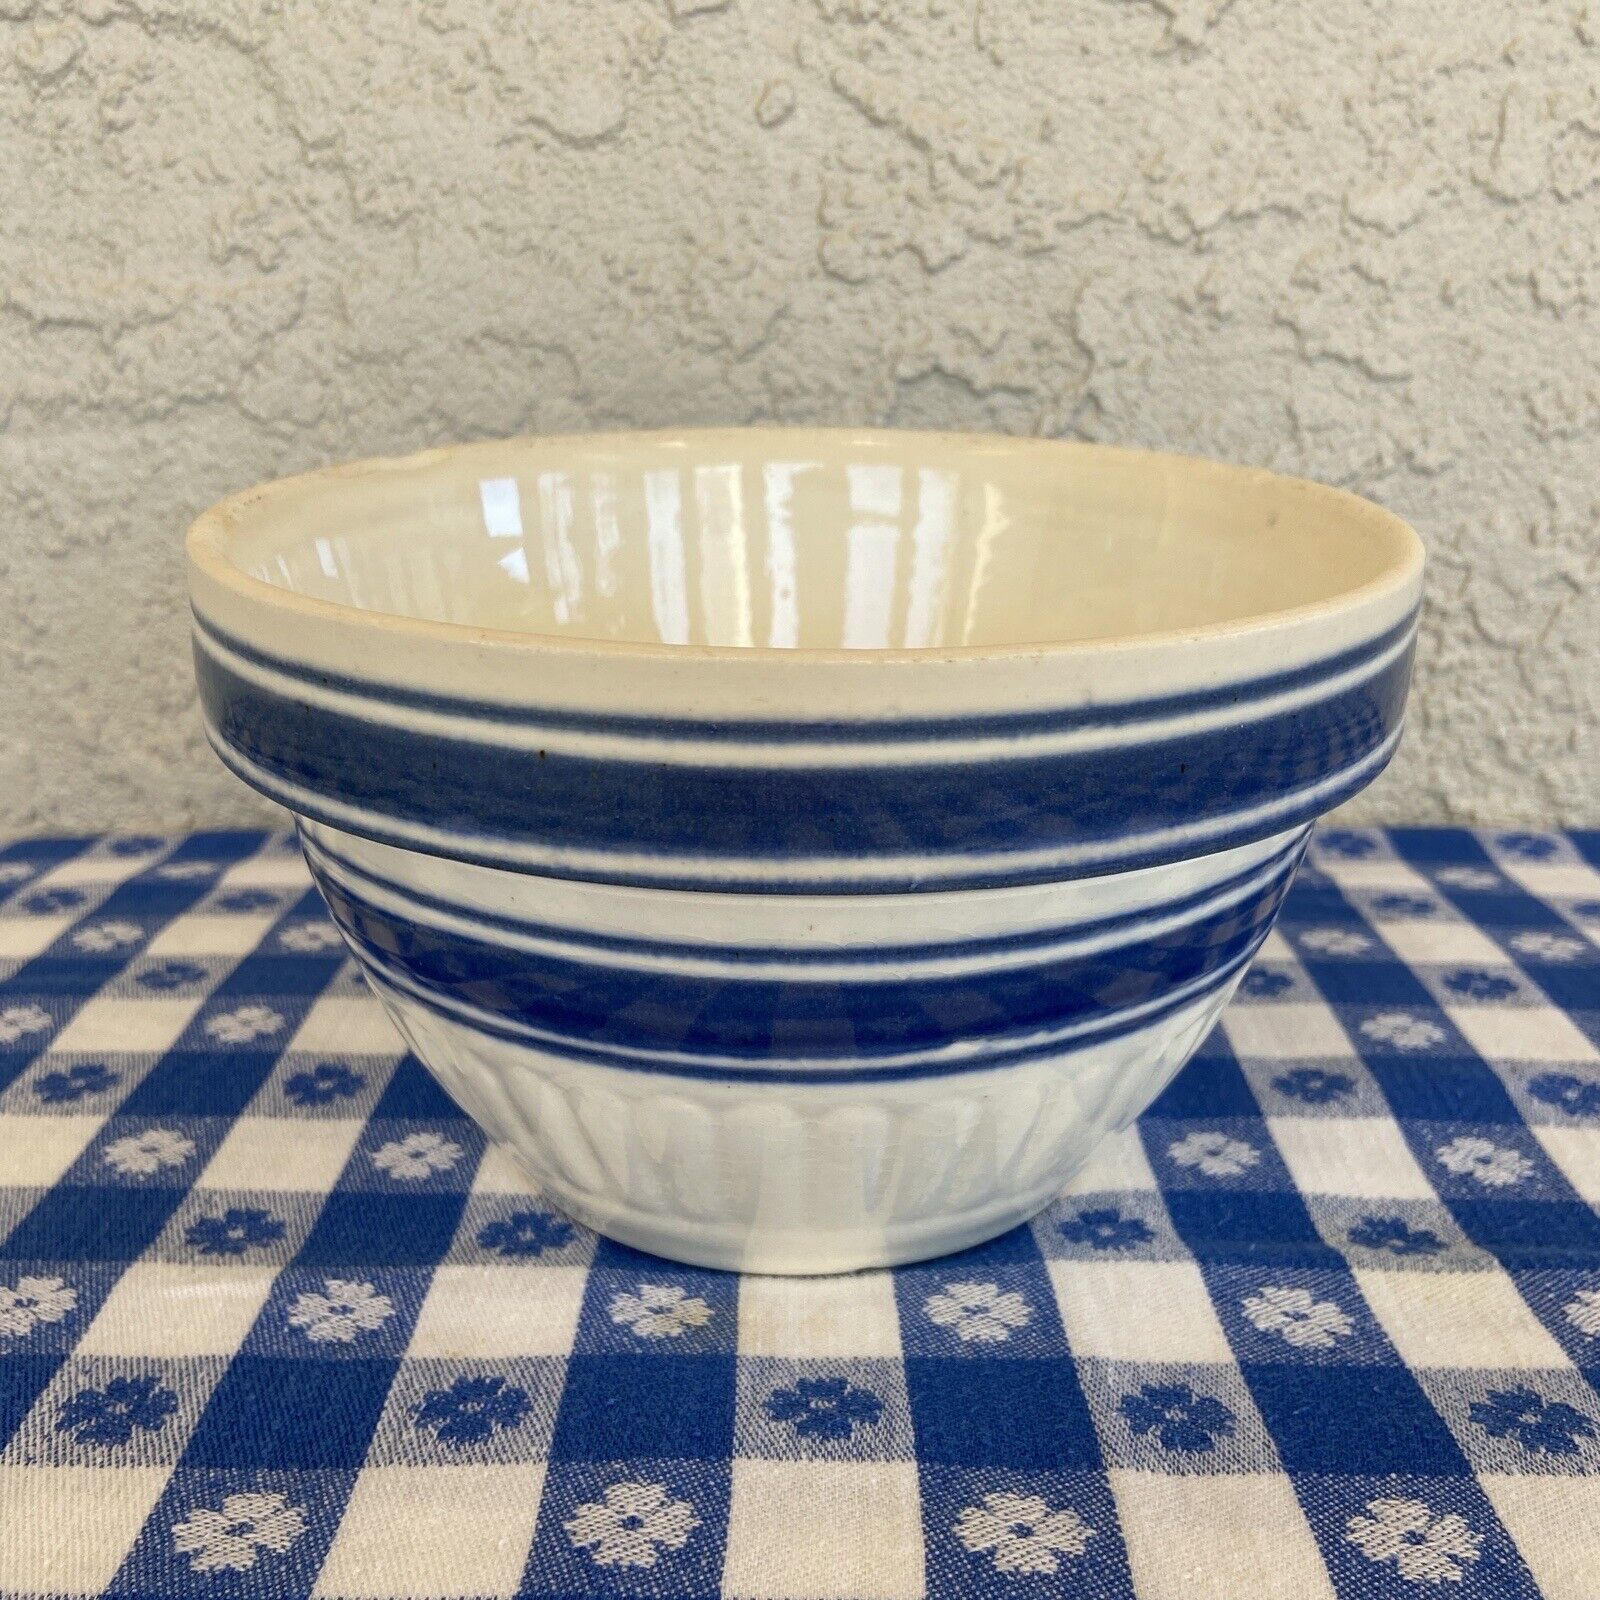 Blue and White Striped 7” Whiteware/Crockery Vintage Mixing Bowl - 1940s